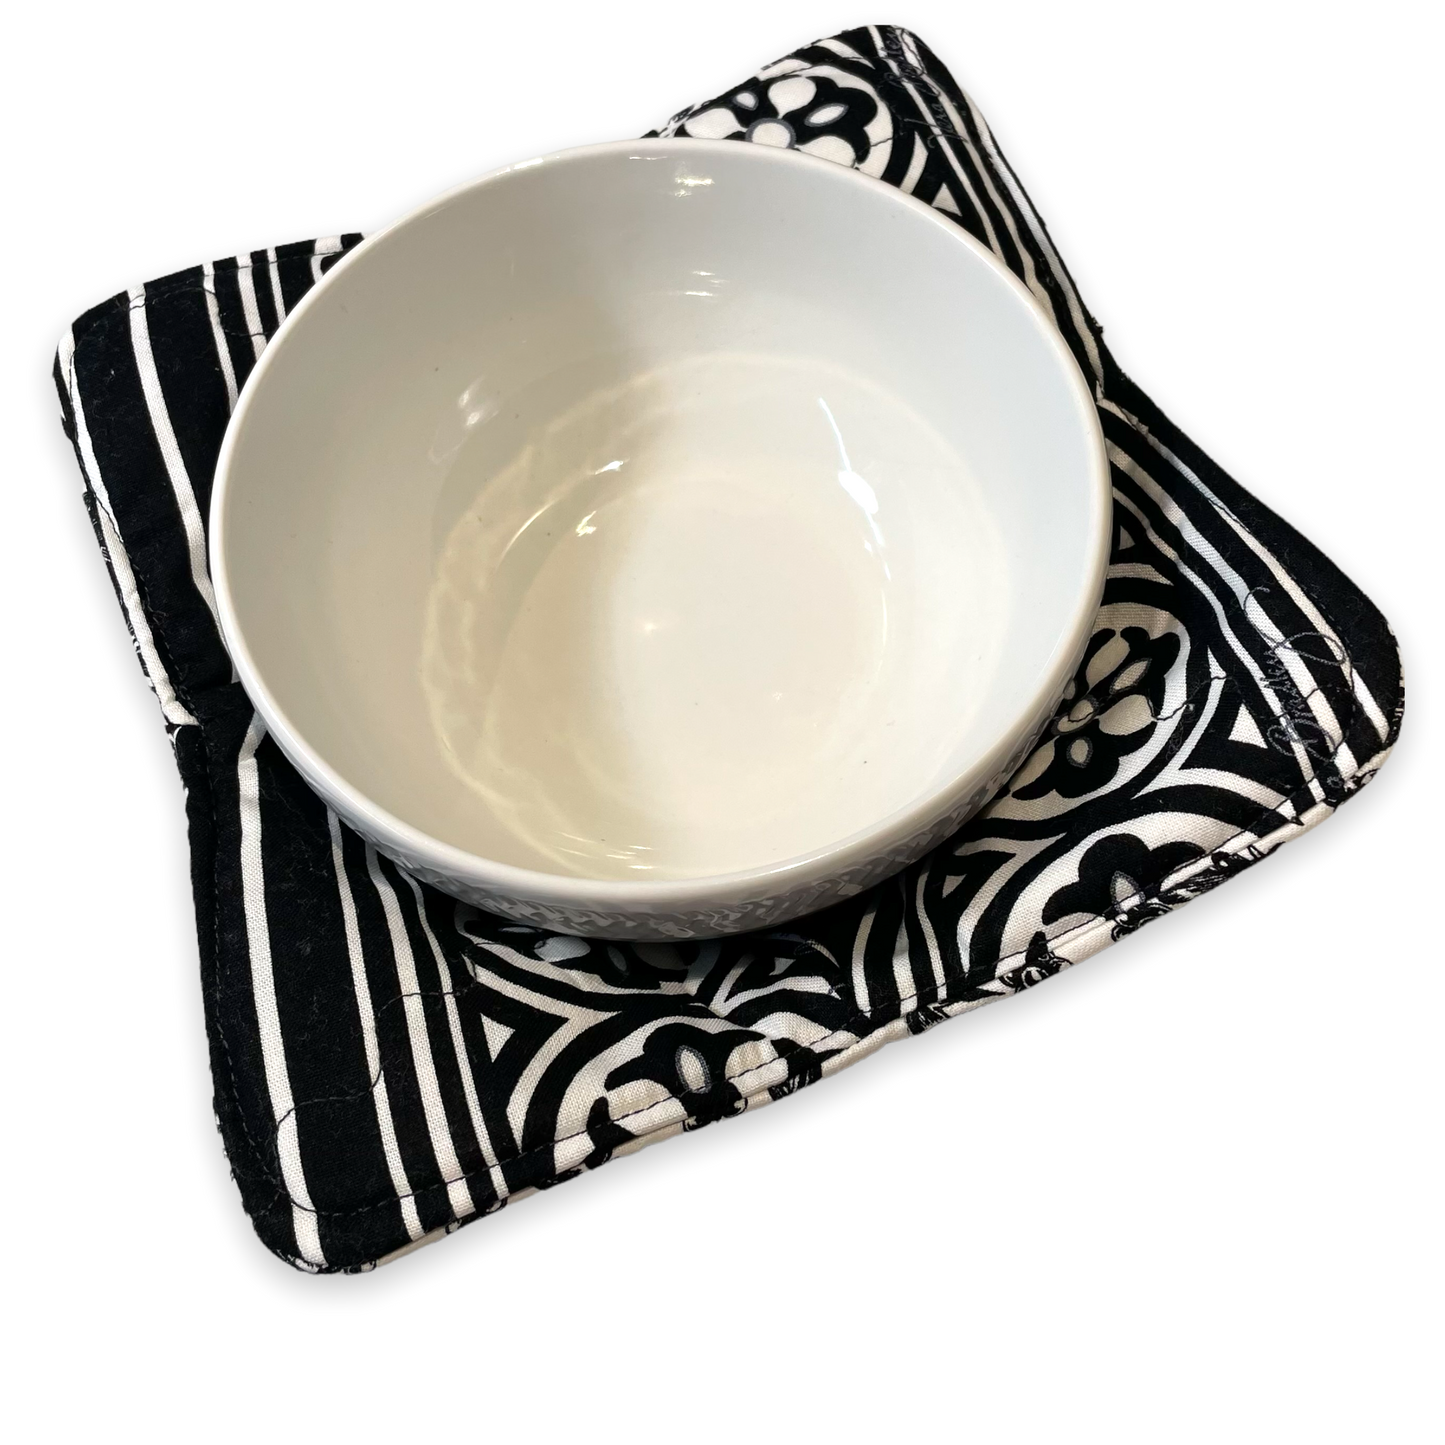 Washable and reversible, these super handy cotton soup bowl huggers are a fantastic addition to your kitchen. Handmade in Canada with quilt cotton, cotton thread and Pellon Wrap and Zap Batting. Soup bowl cozies make great house warming gifts and stocking stuffers. Shop your favorite color today and be sure to follow along on the Home Stitchery Decor YouTube Channel.